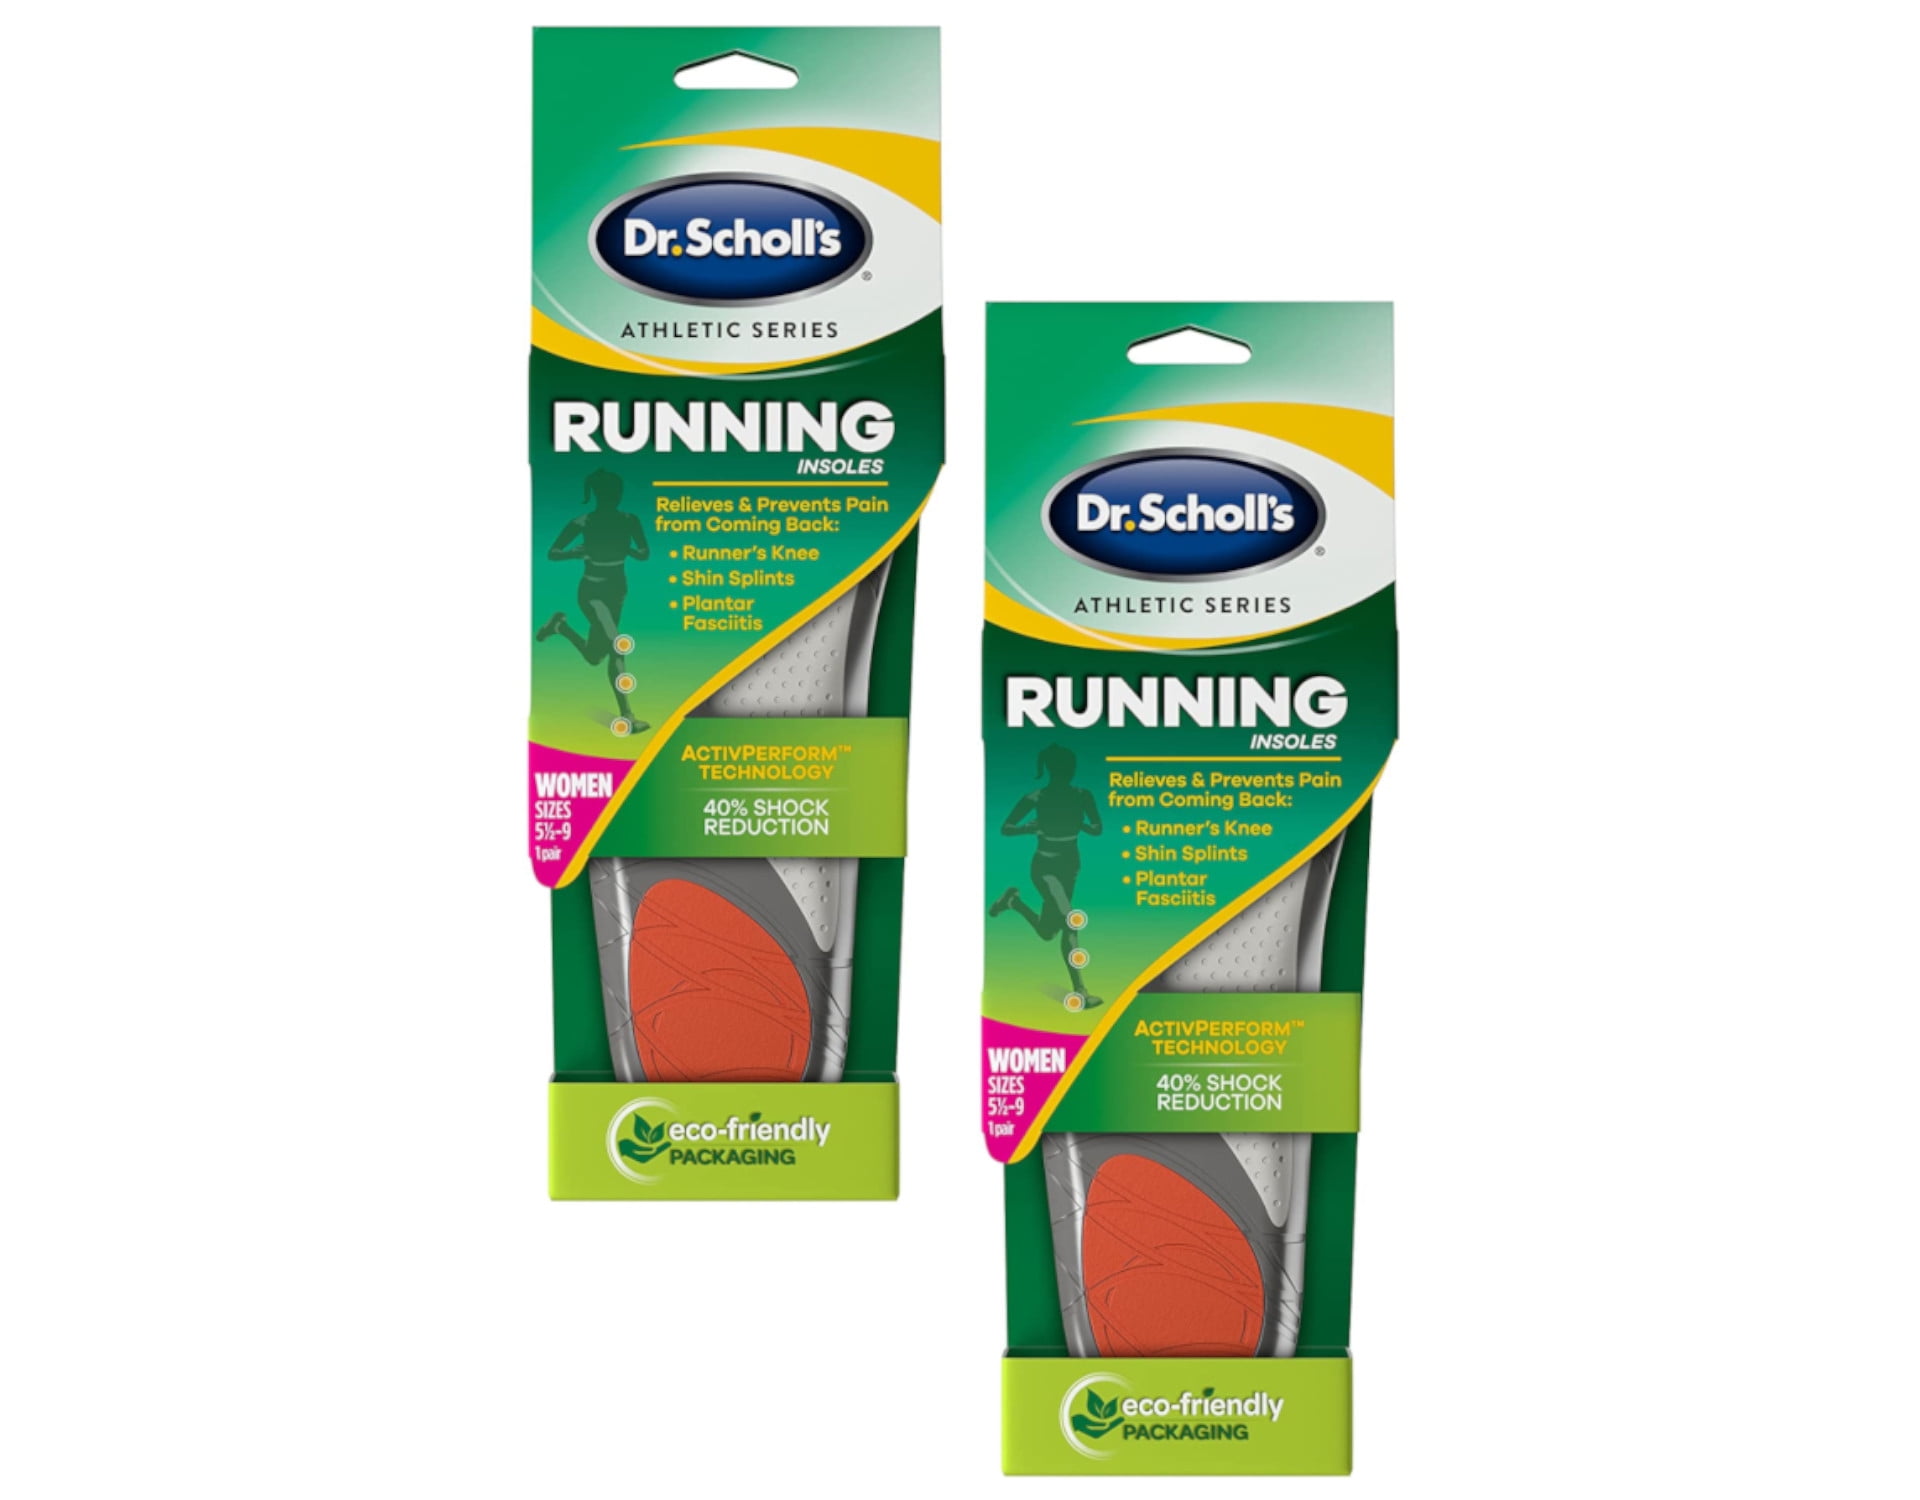 Dr Scholl's Athletic Series Running Insoles MENS SIZE 10.5-14 BRAND NEW! 